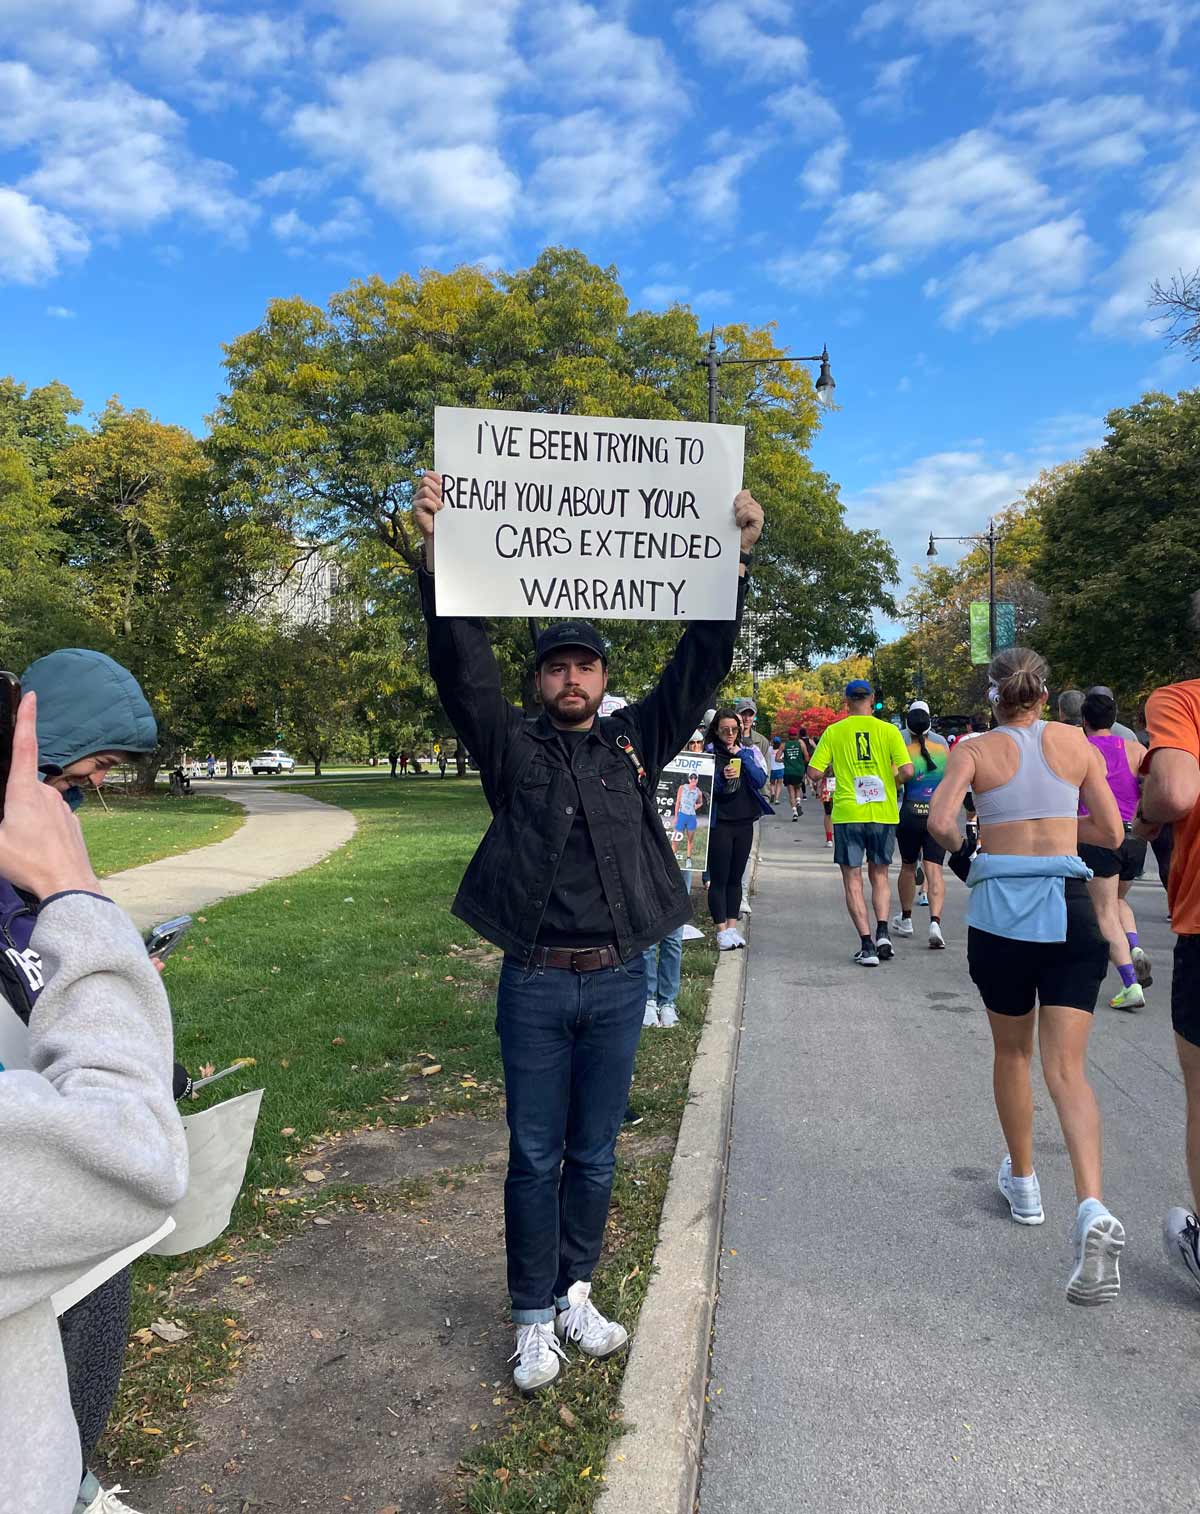 Supporting the Chicago marathon today